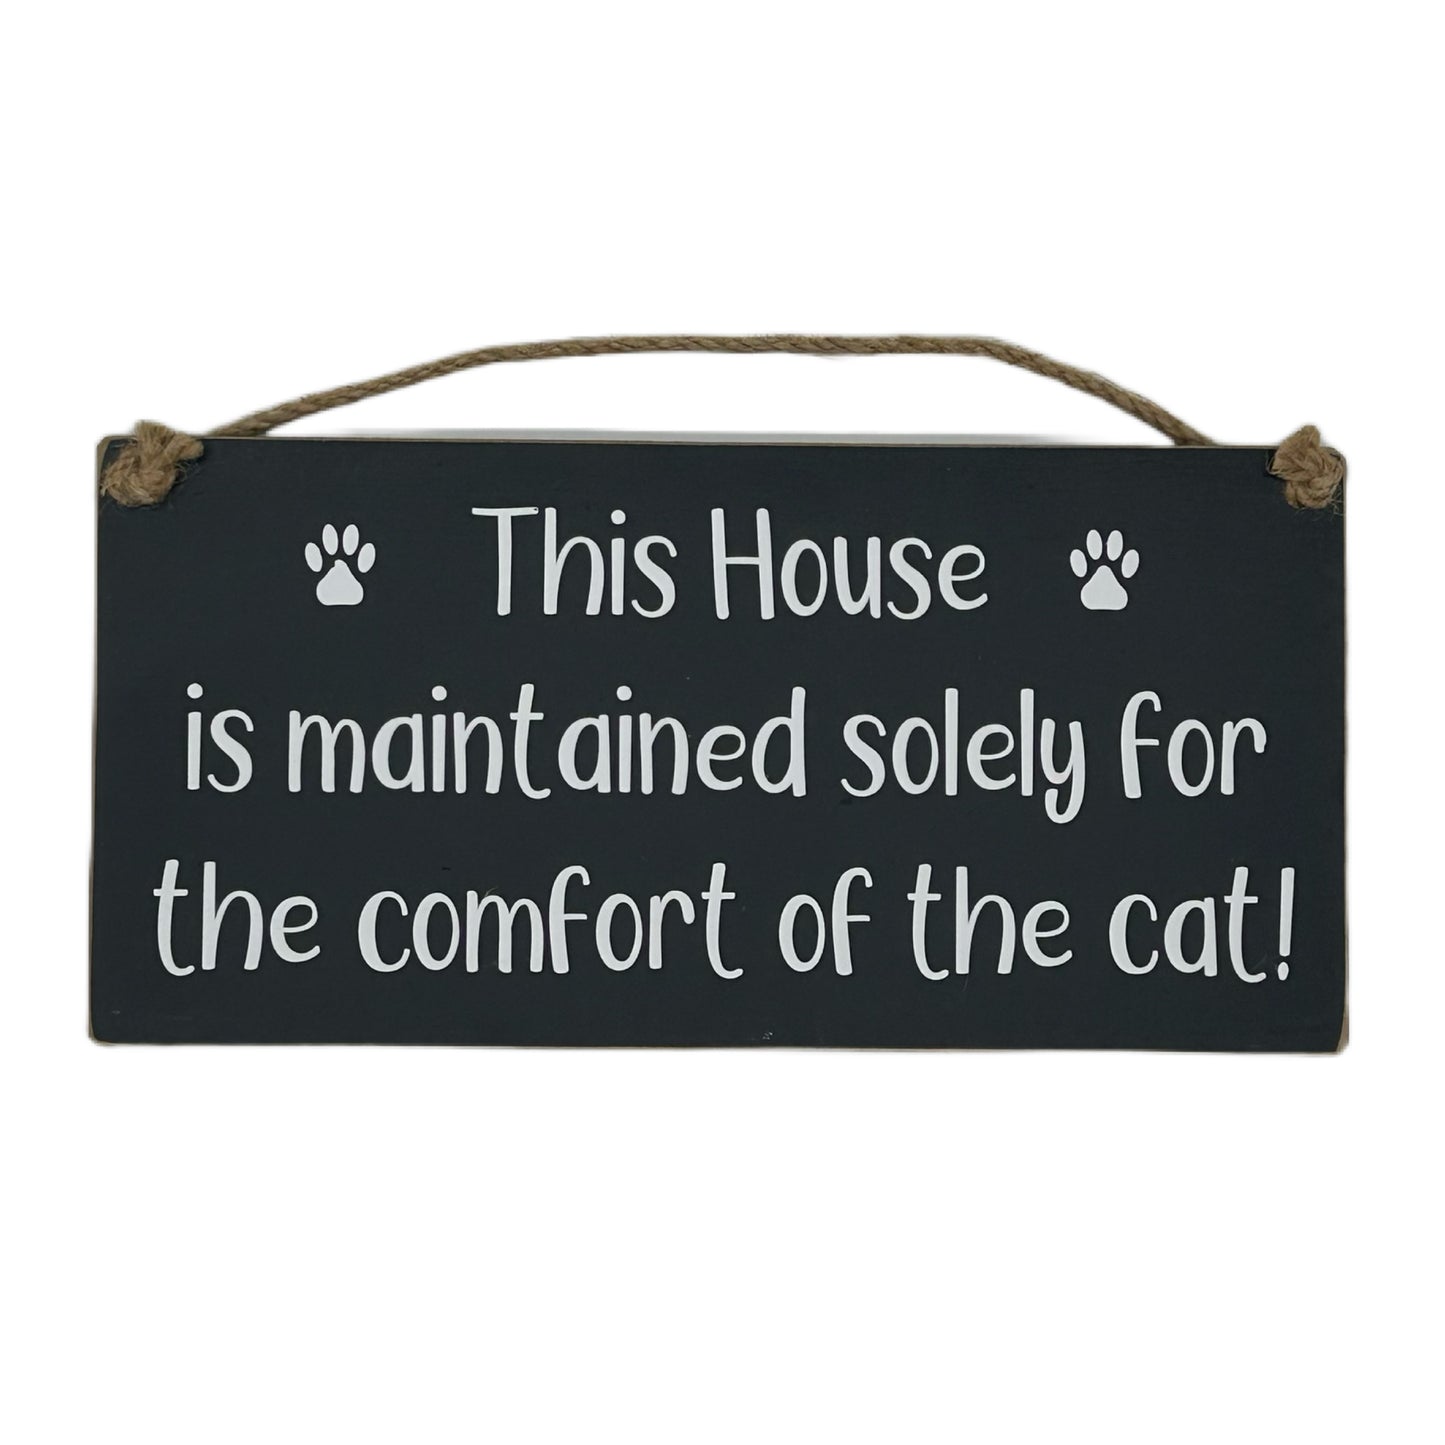 This house is maintained sole for the comfort of the cat!